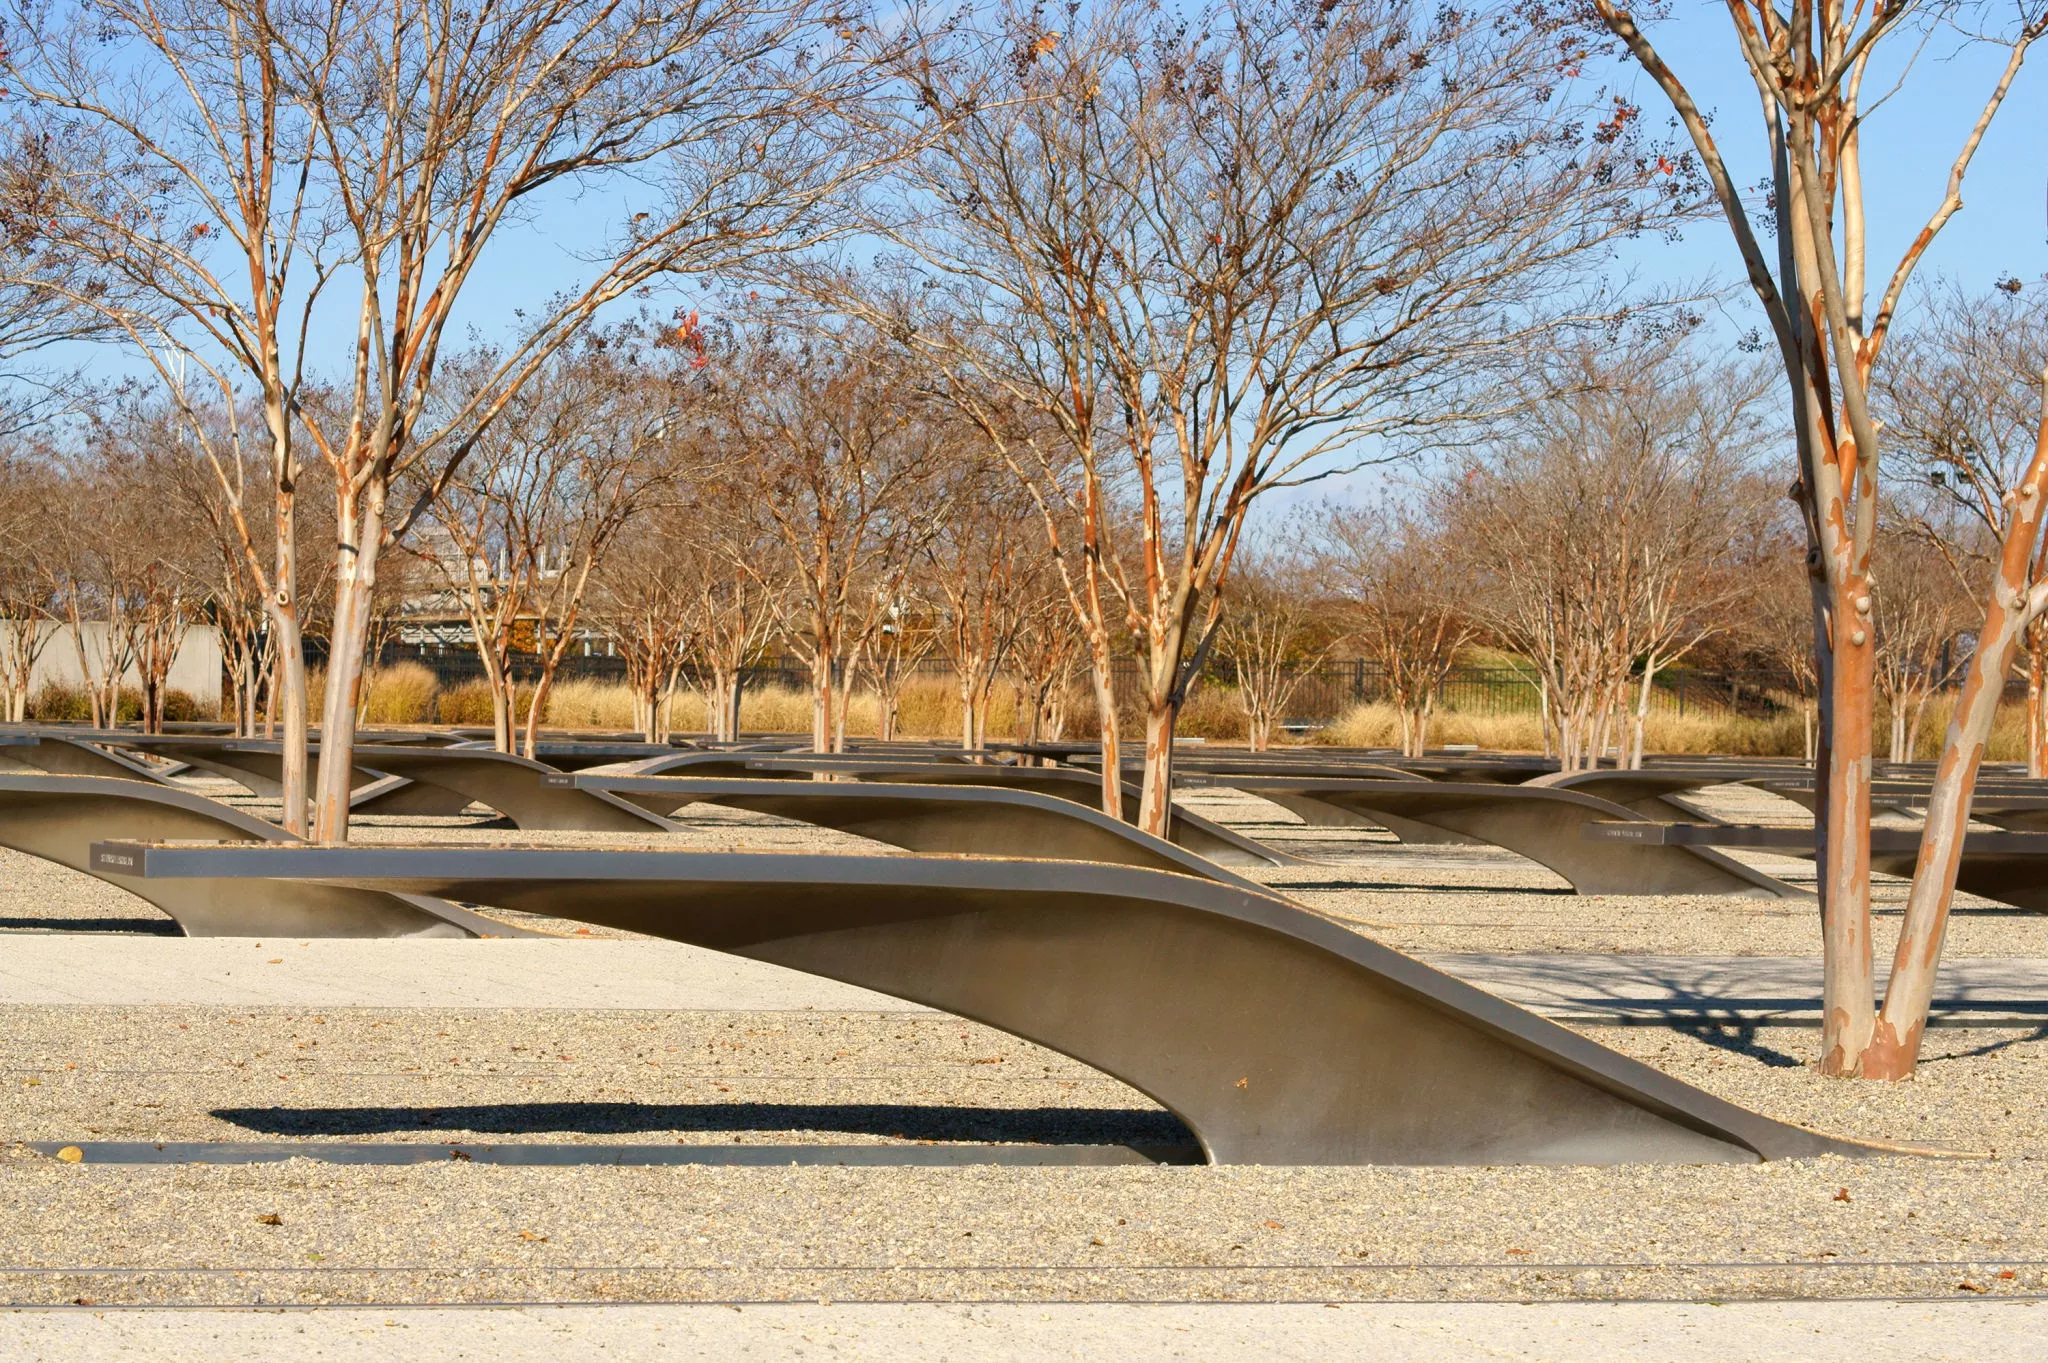 Pentagon Memorial in USA, North America | Monuments - Rated 3.8